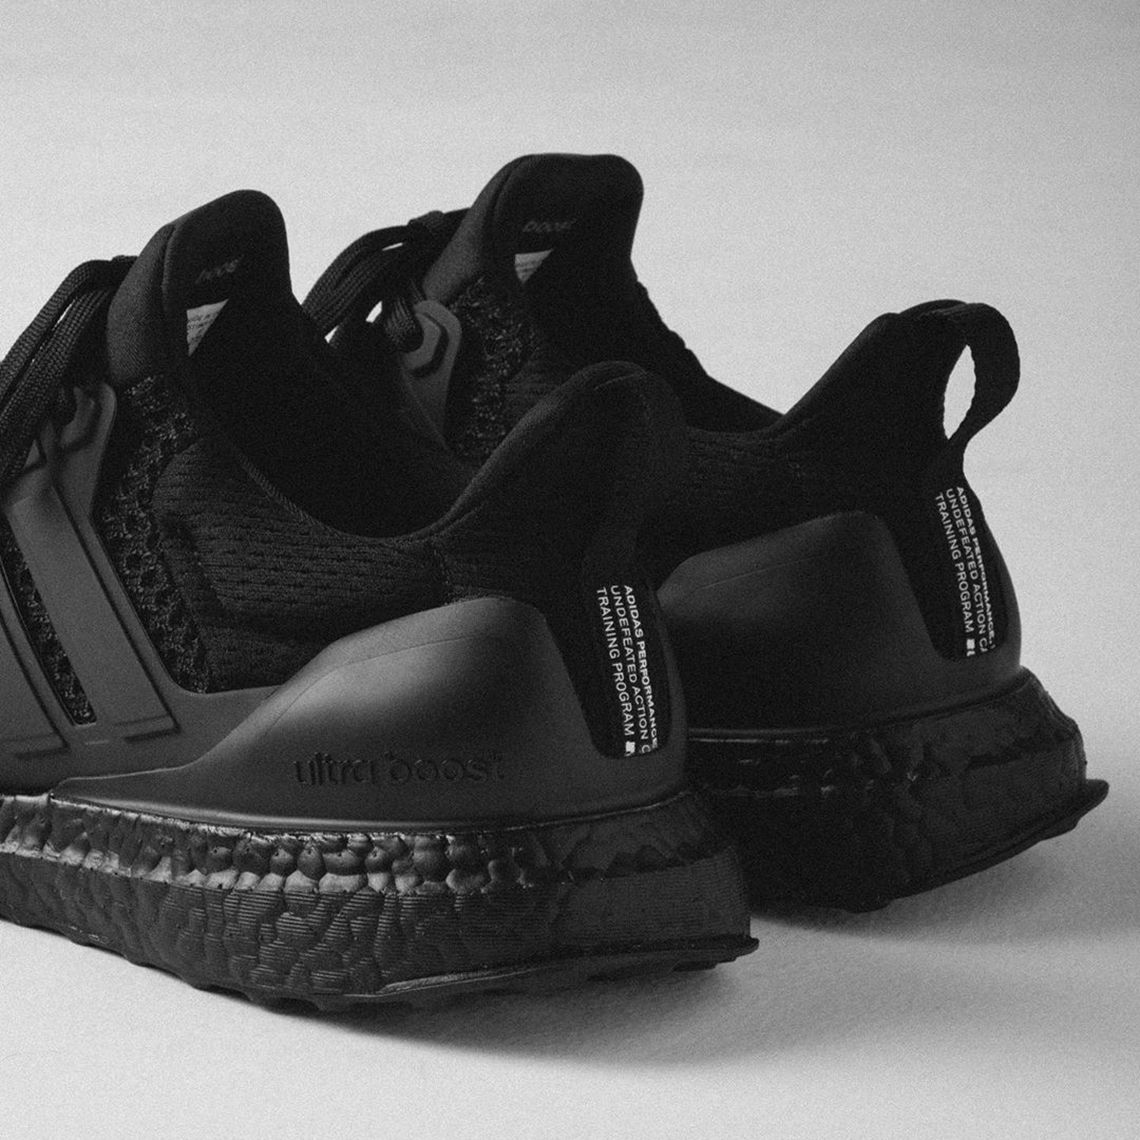 undefeated x adidas ultra boost triple black